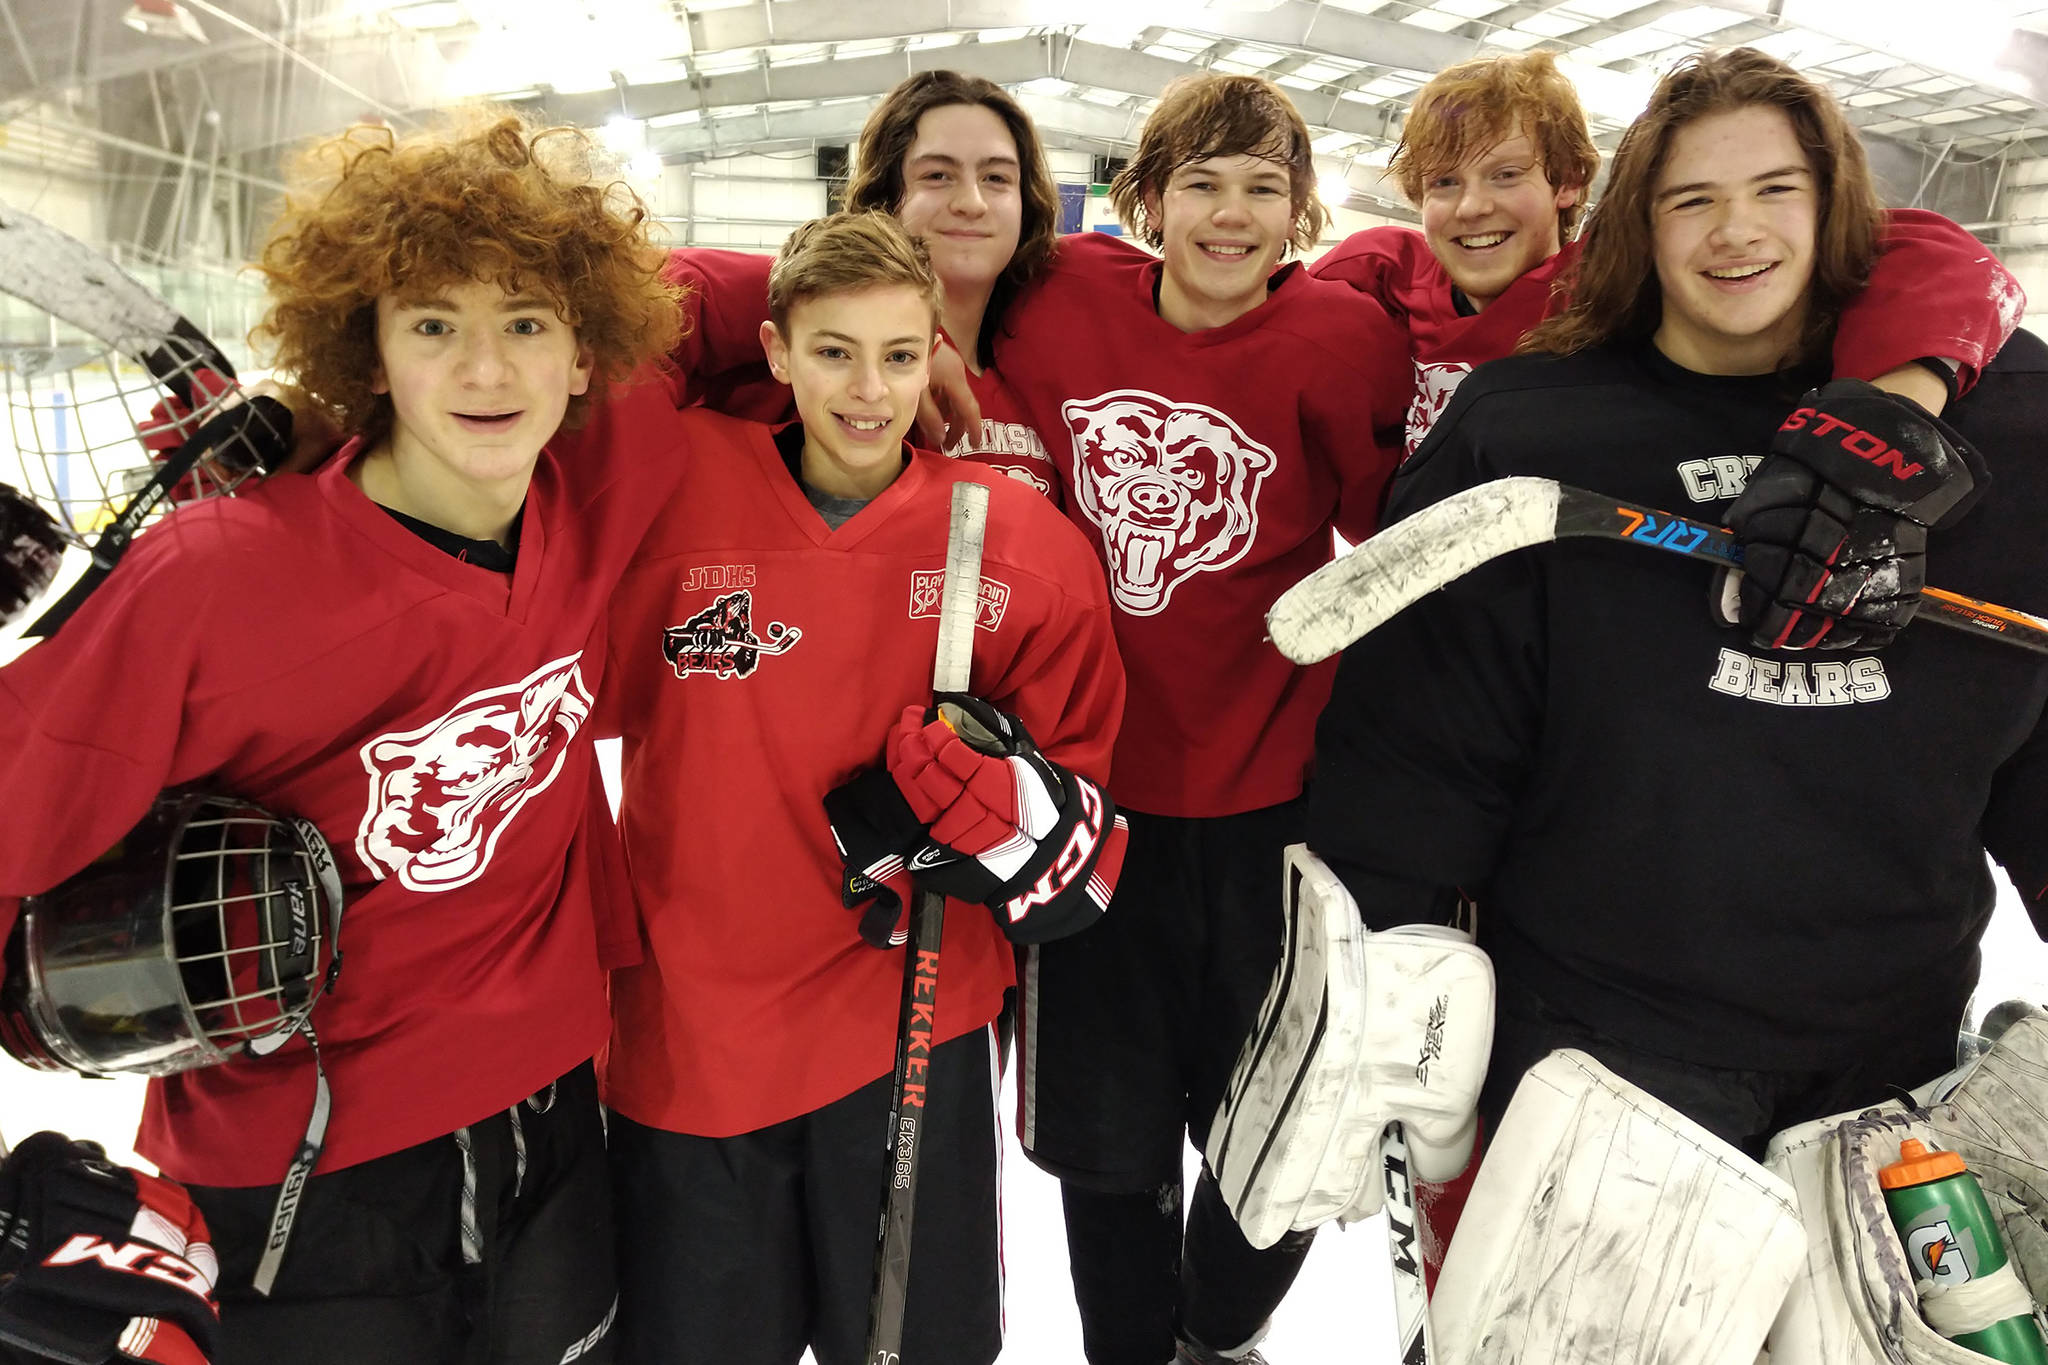 The Juneau-Douglas High School hockey team crowned “Team Russia” (Zac Stagg, Fin Shibler, Chance Turinsky, Dalton Hoy, Owen Squires, Dawson Hickok) as the eighth annual Turkey Day 3-on-3 champions on Wednesday morning. The intersquad tournament pits six teams against one another and awards the winners with a dozen Breeze Inn donuts. (Courtesy Photo | Luke Adams)